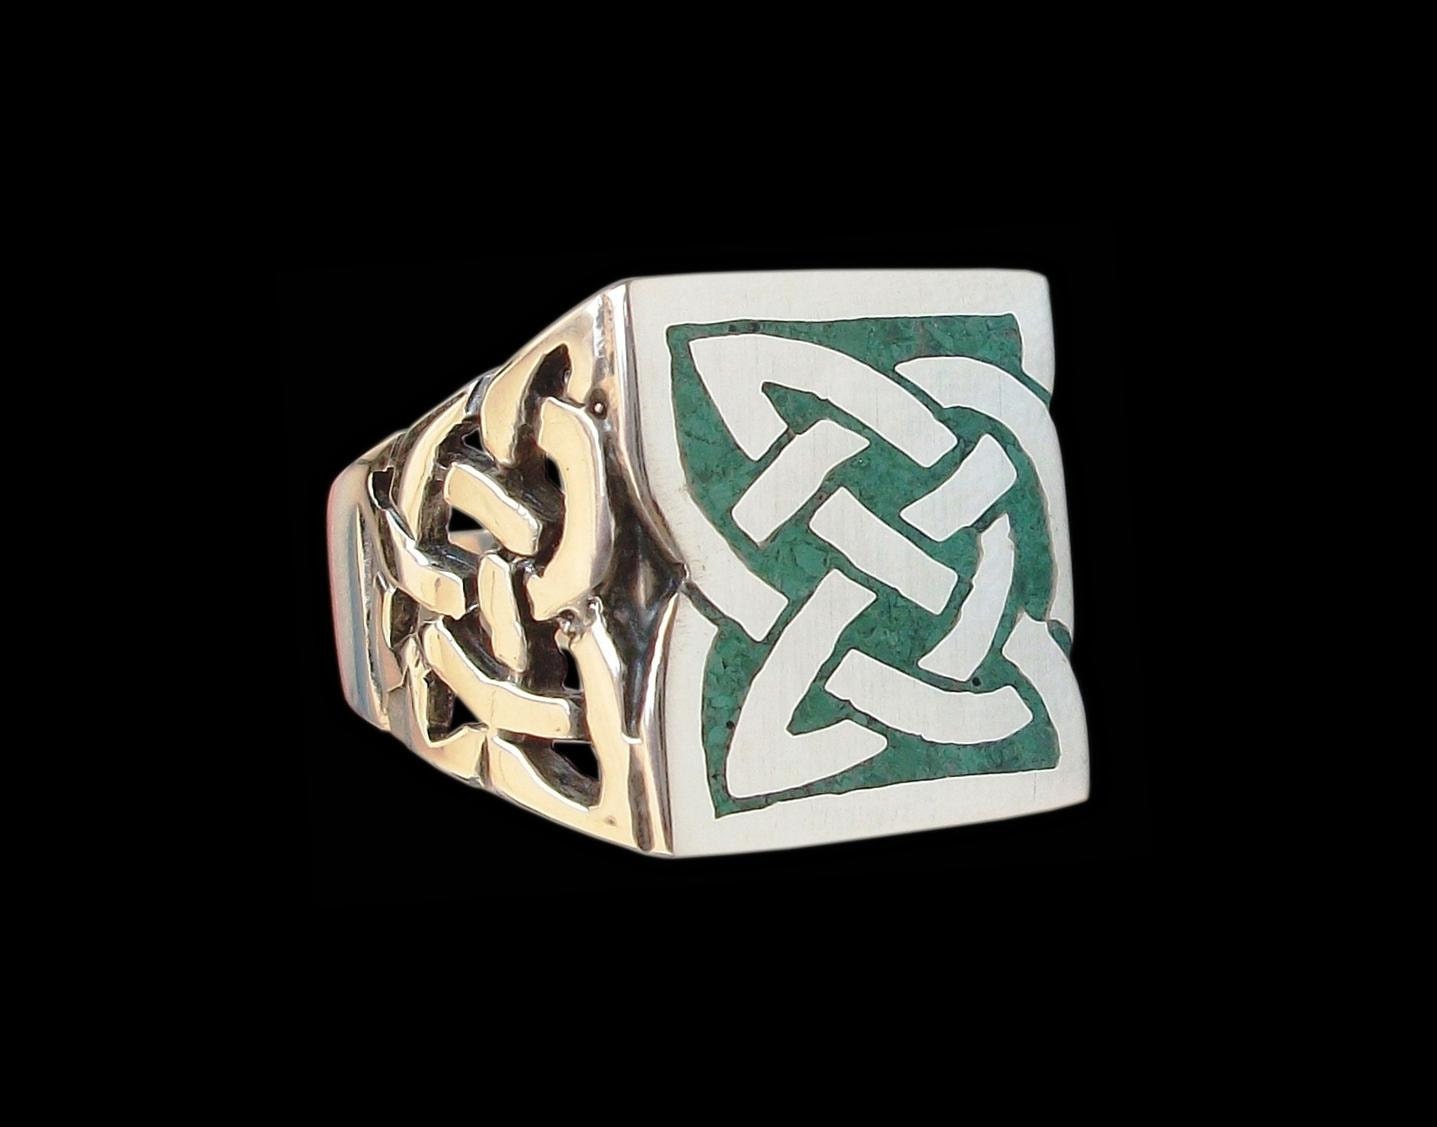 Celtic ring - Sterling Silver Celtic Knot ring with green malachite chips- All sizes -